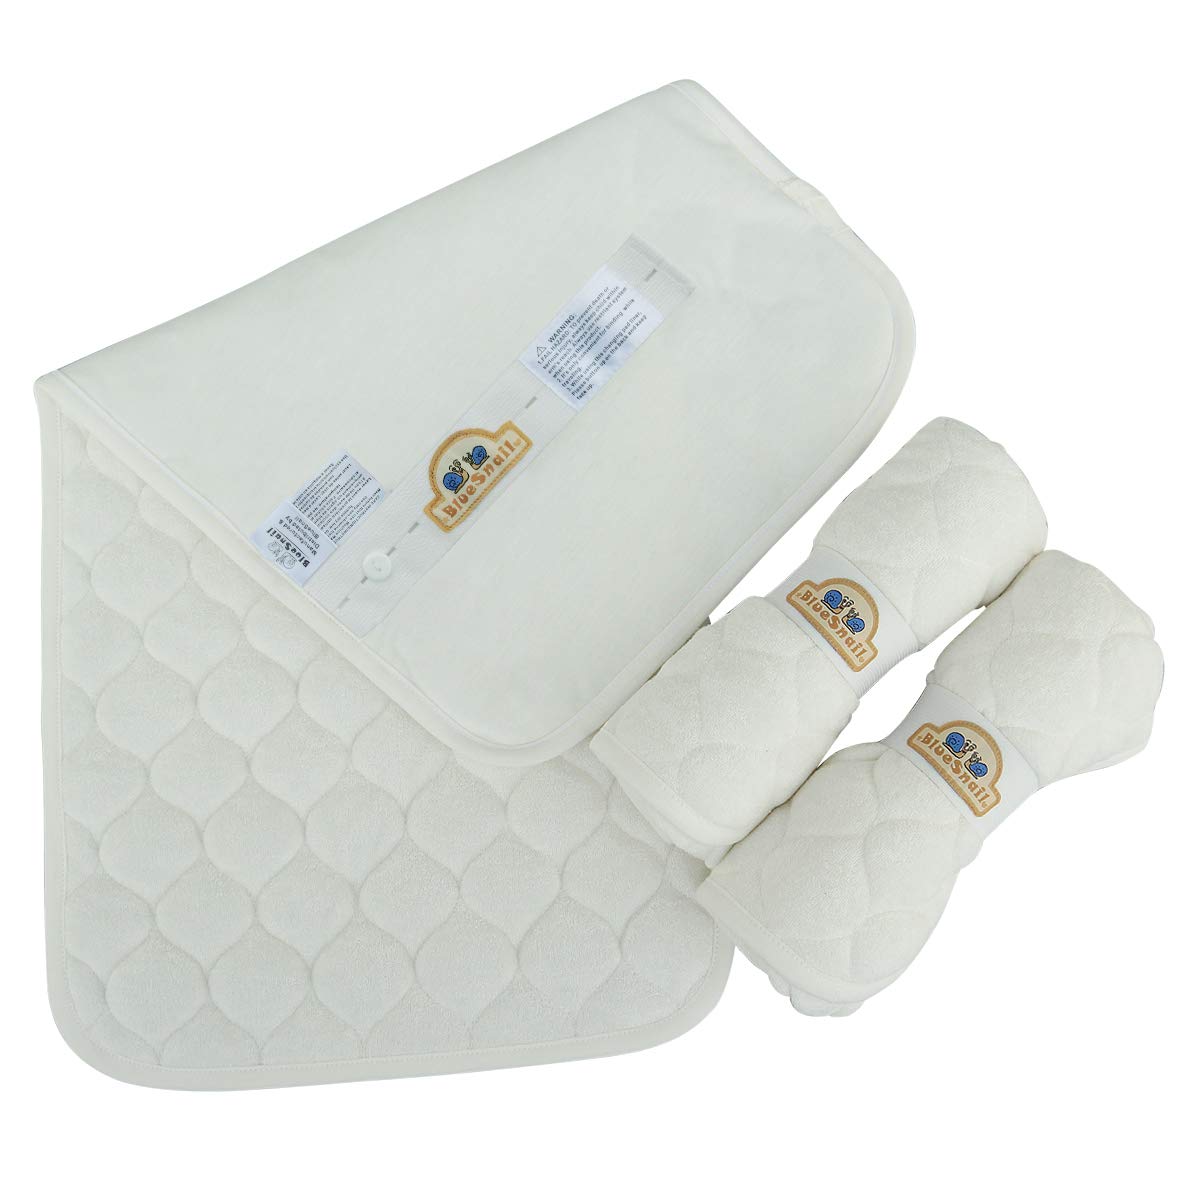 US$ 15.95 - Bamboo Quilted Thicker Longer Waterproof Changing Pad 